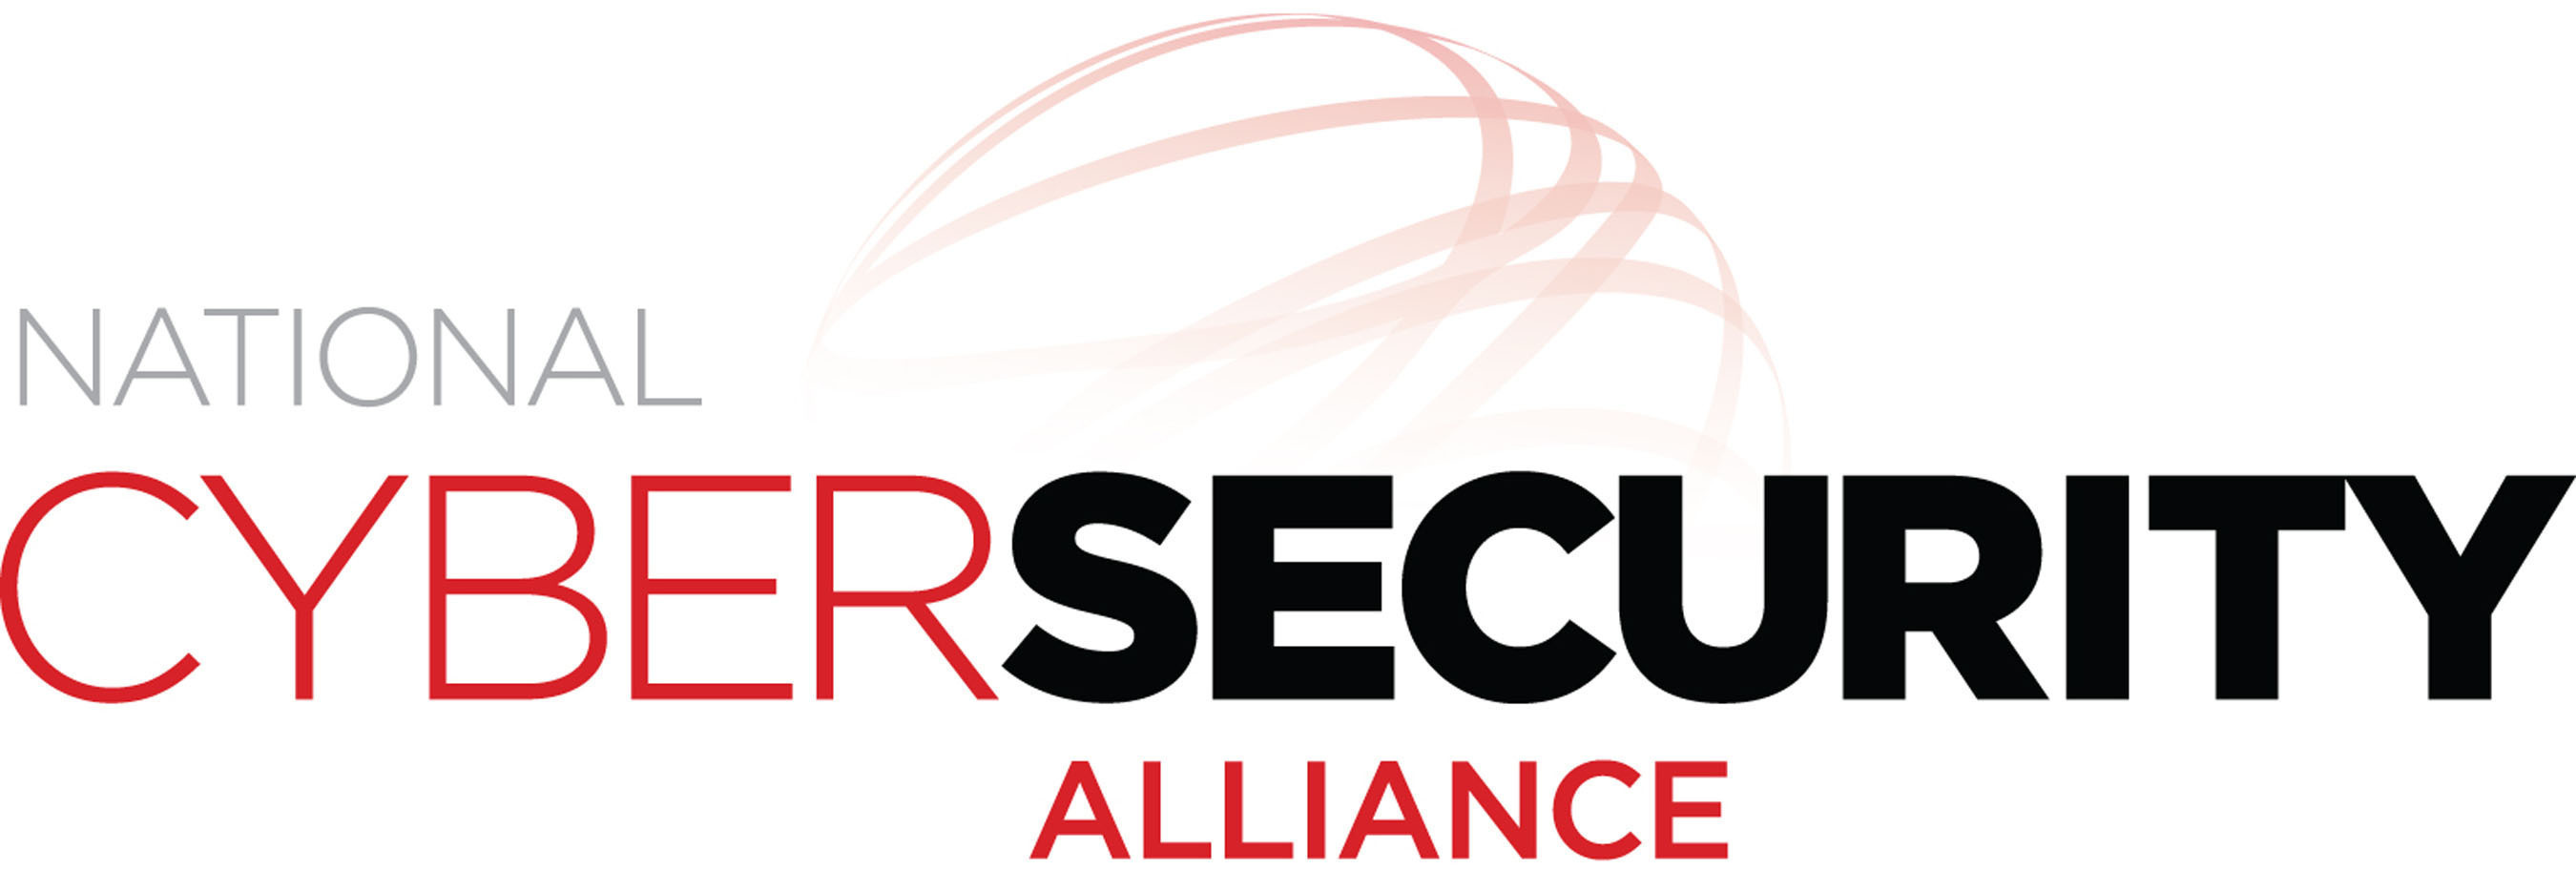 National Cyber Security Alliance.